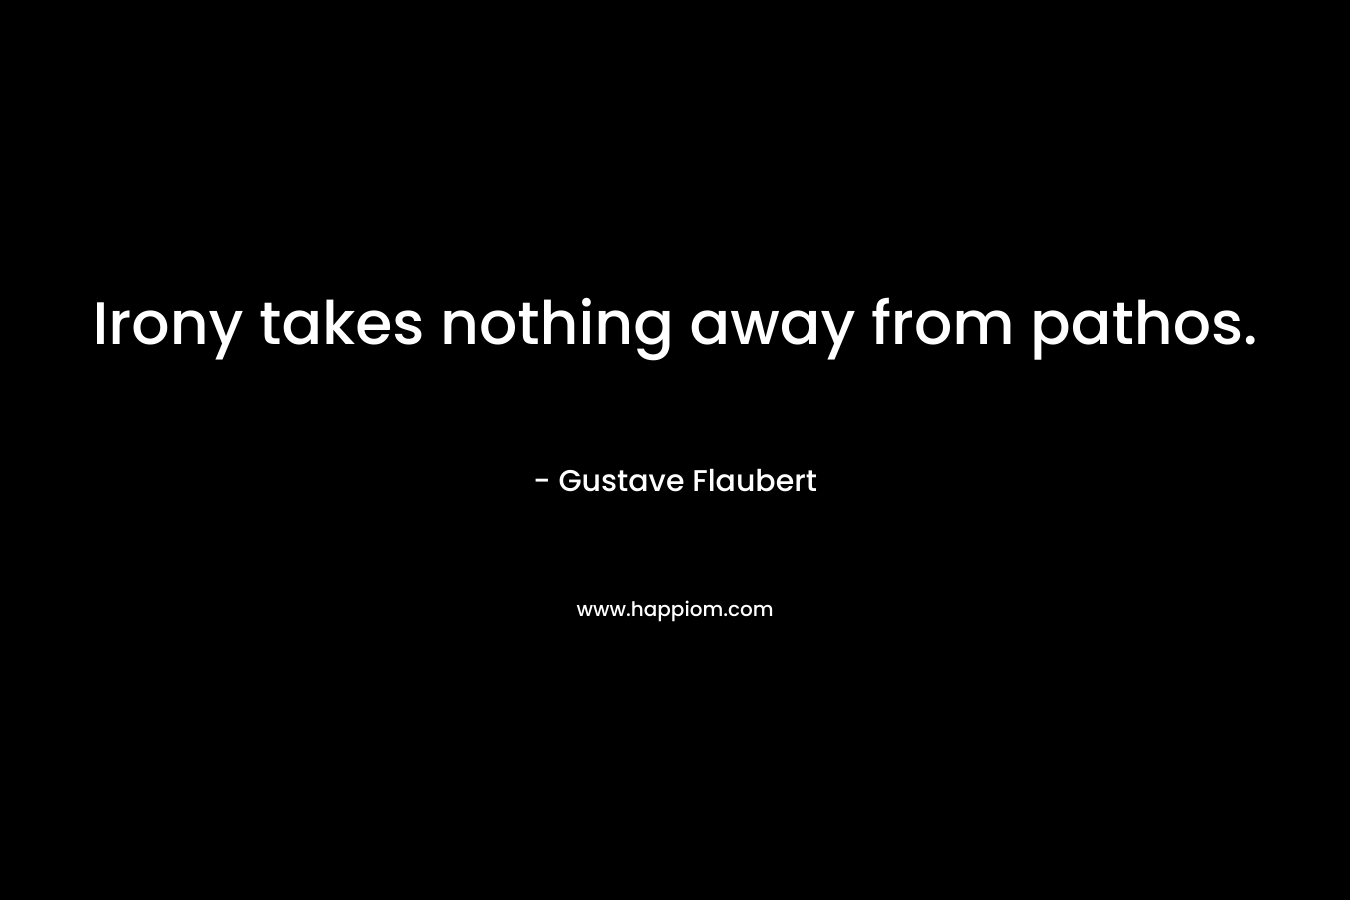 Irony takes nothing away from pathos. – Gustave Flaubert